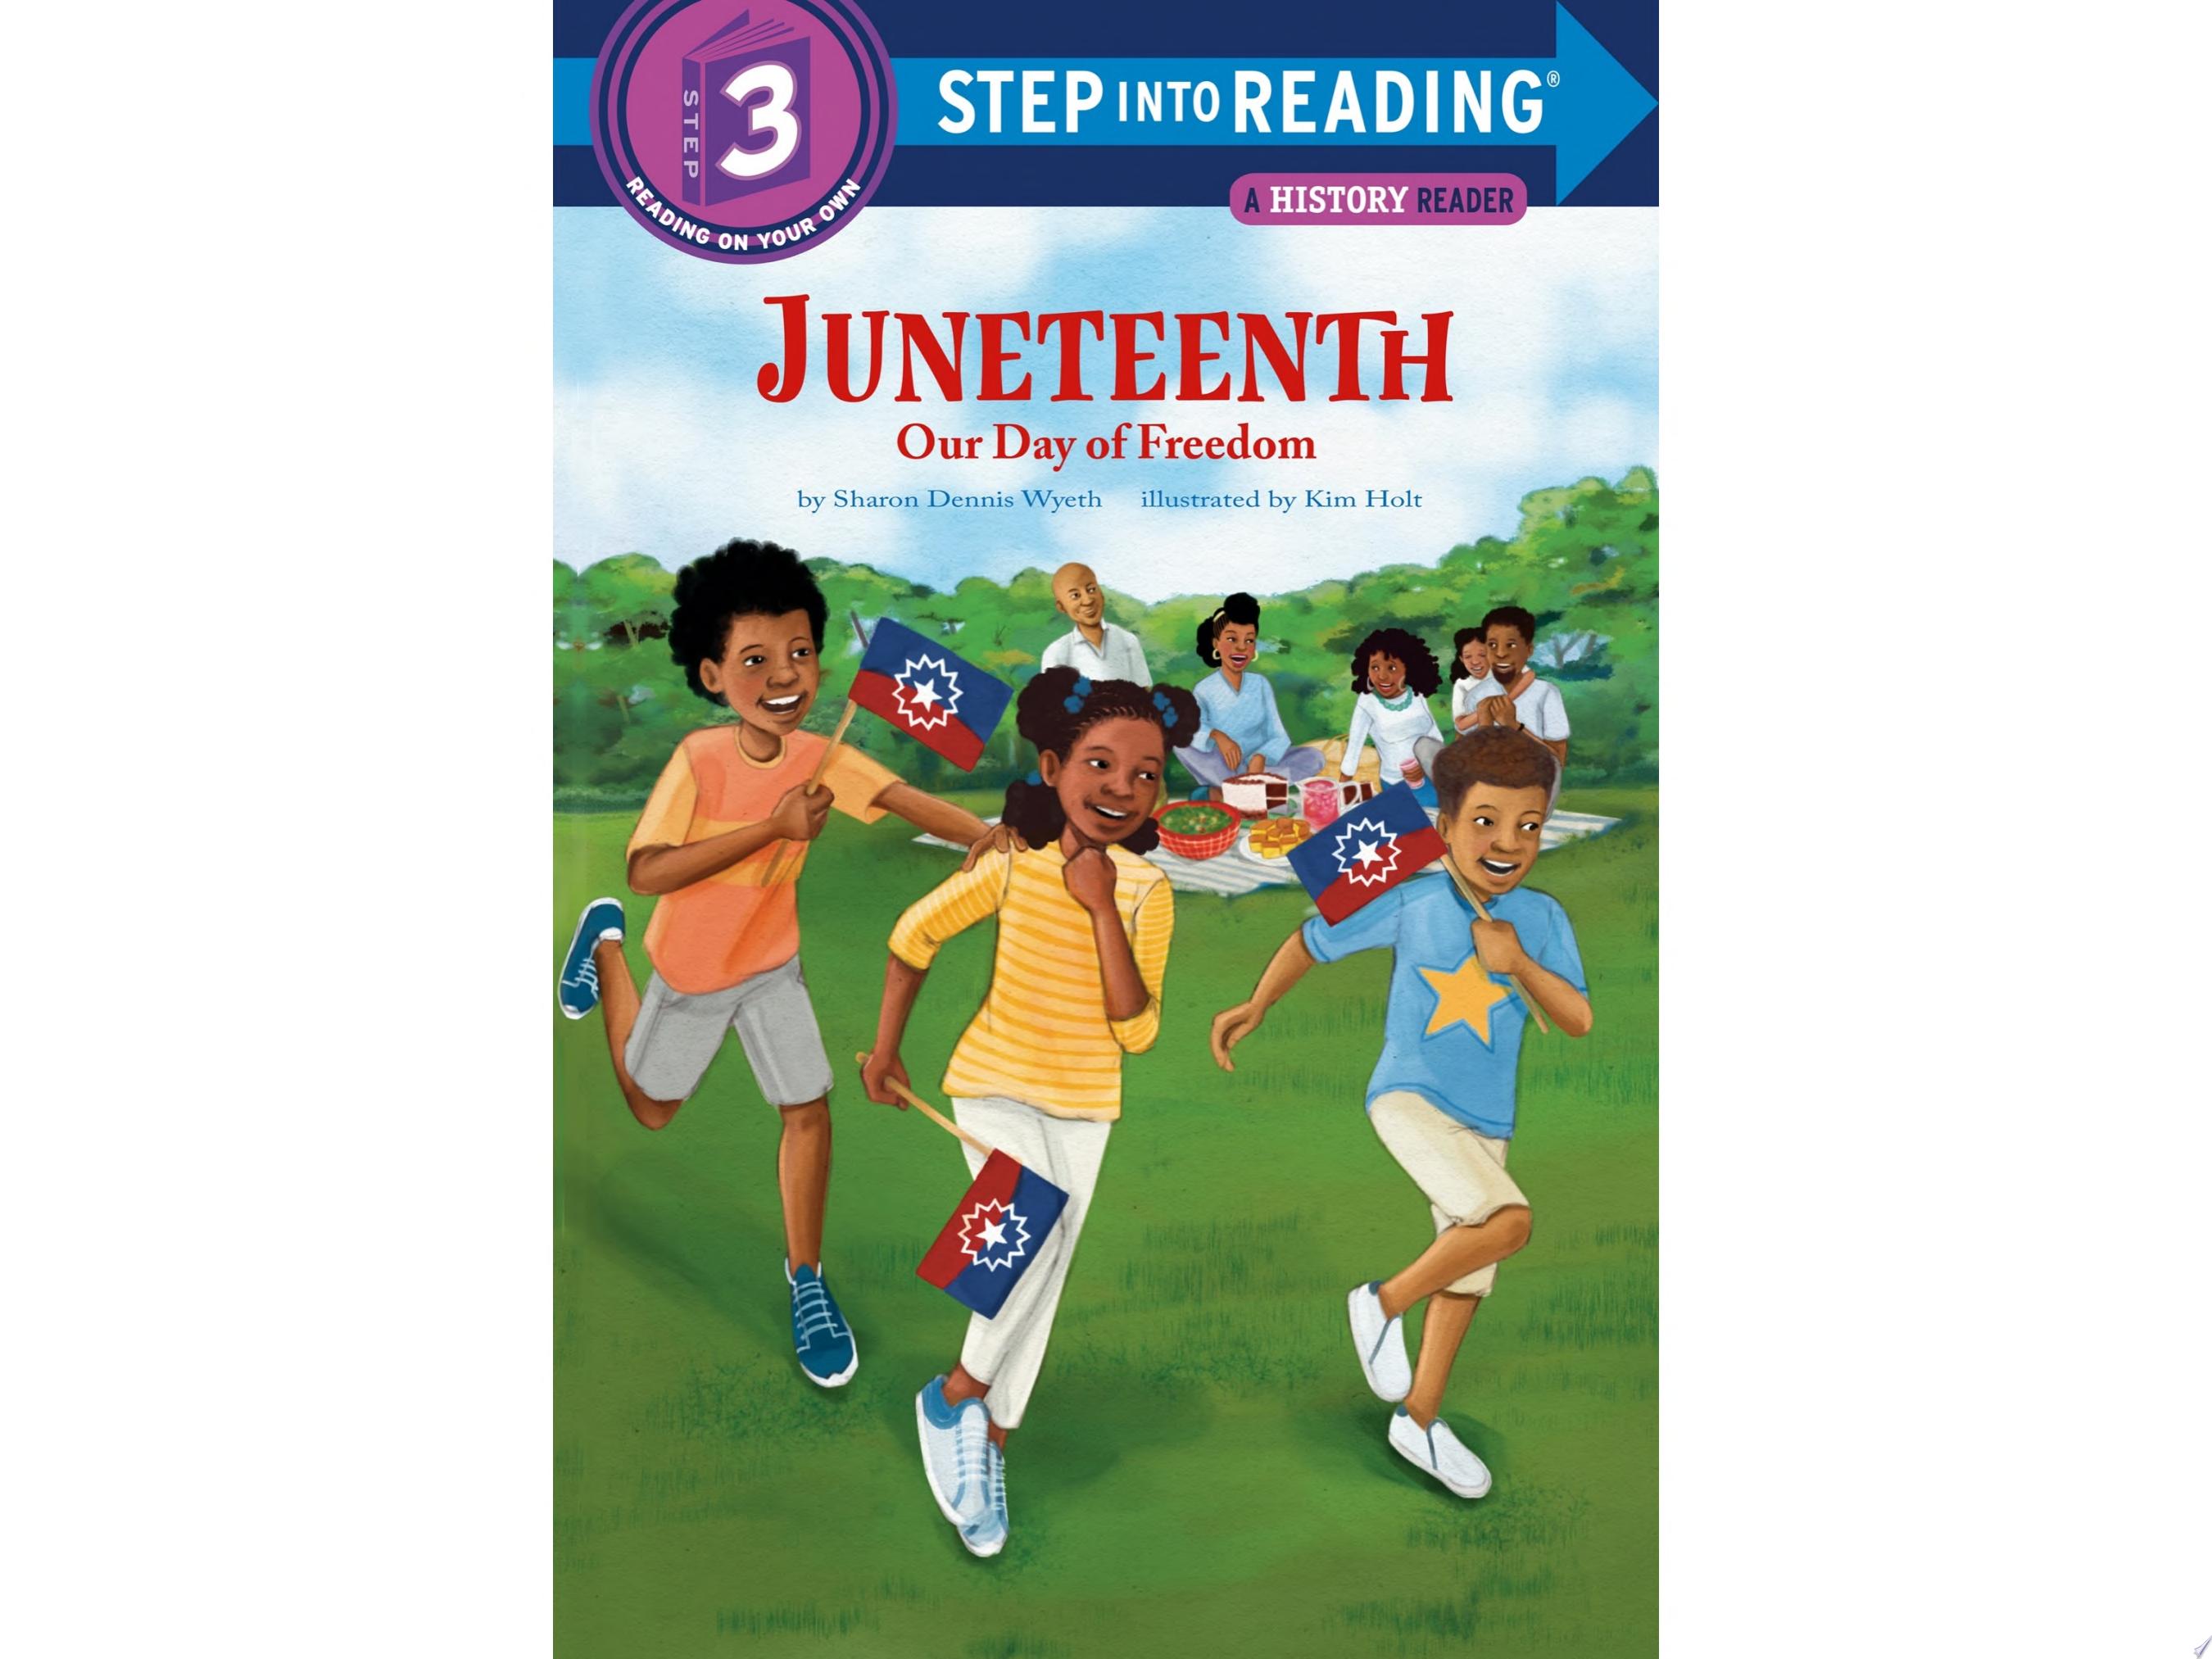 Image for "Juneteenth: Our Day of Freedom"